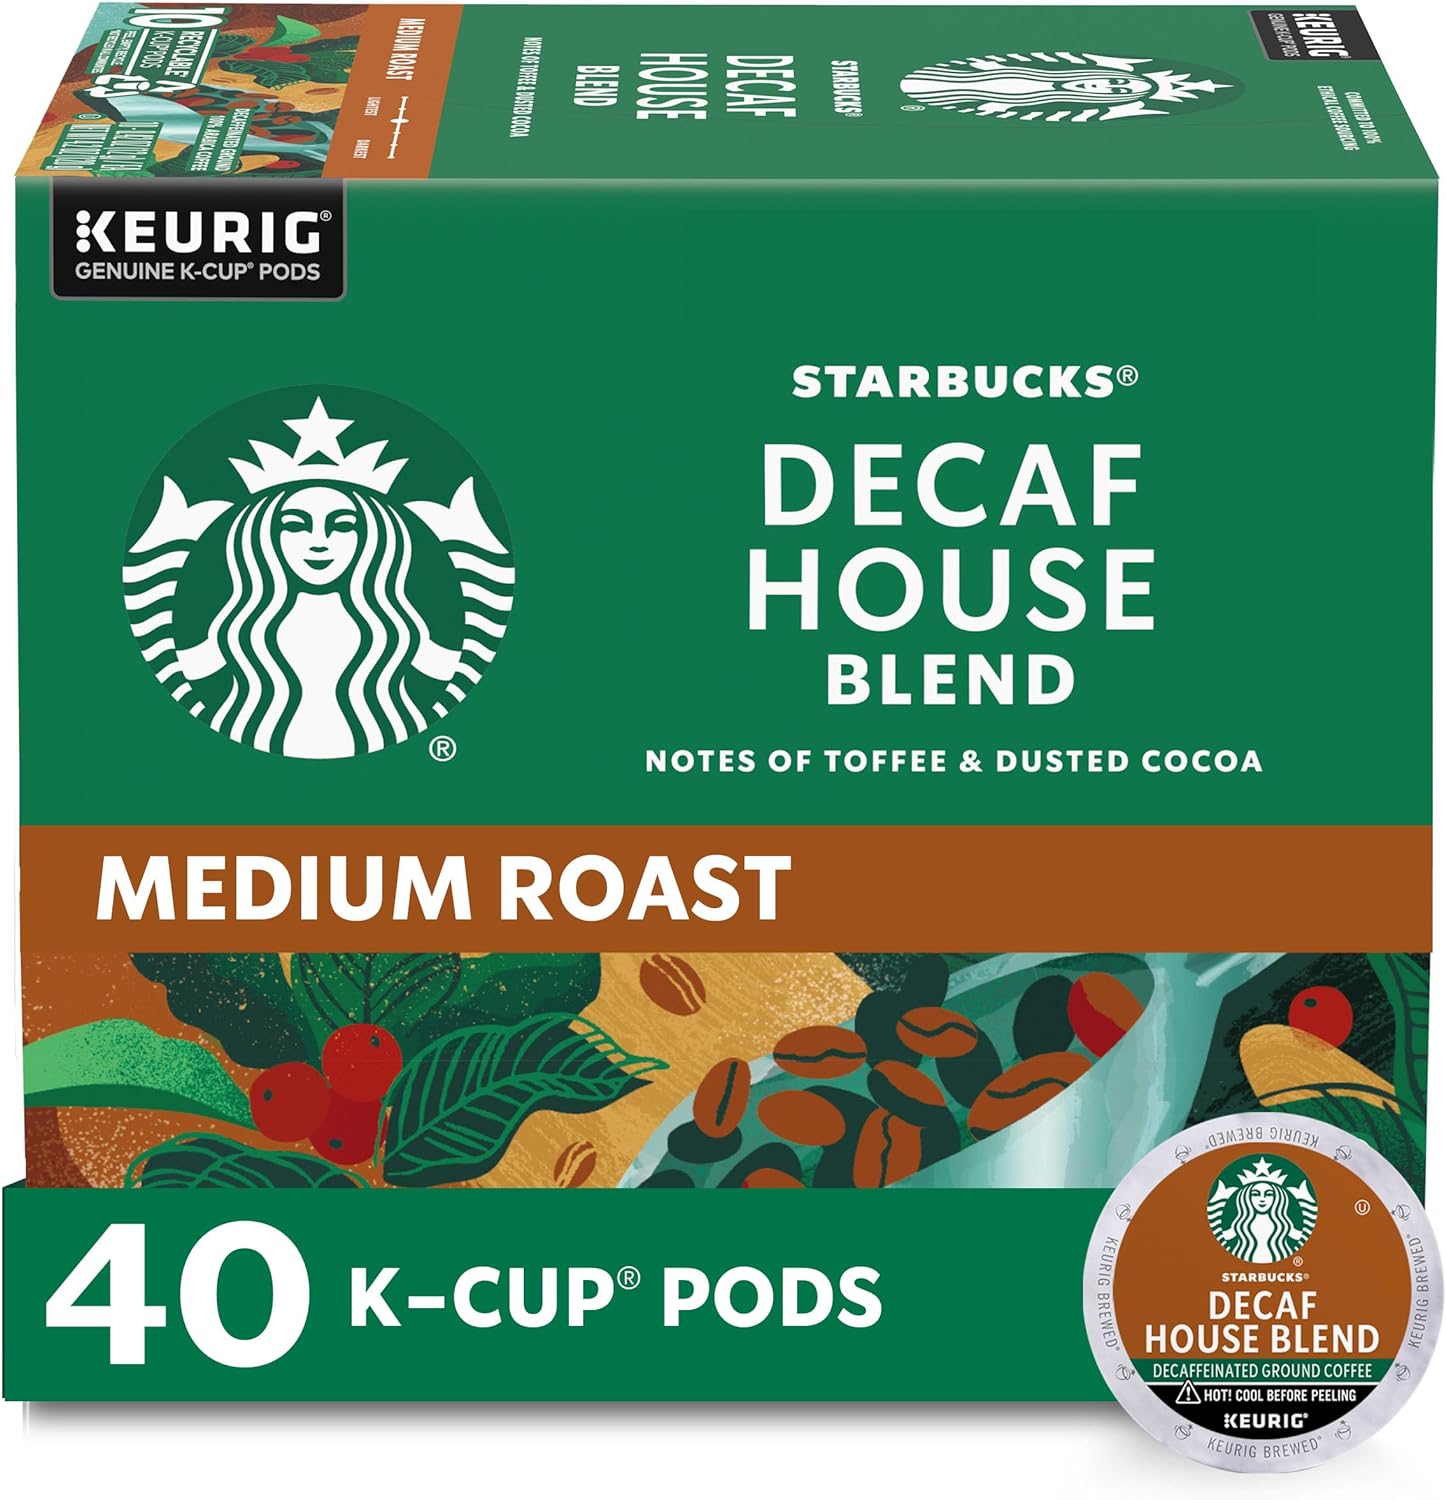 Starbucks Decaf K-Cup Coffee Pods, House Blend for Keurig Brewers, 1 box (40 pods)